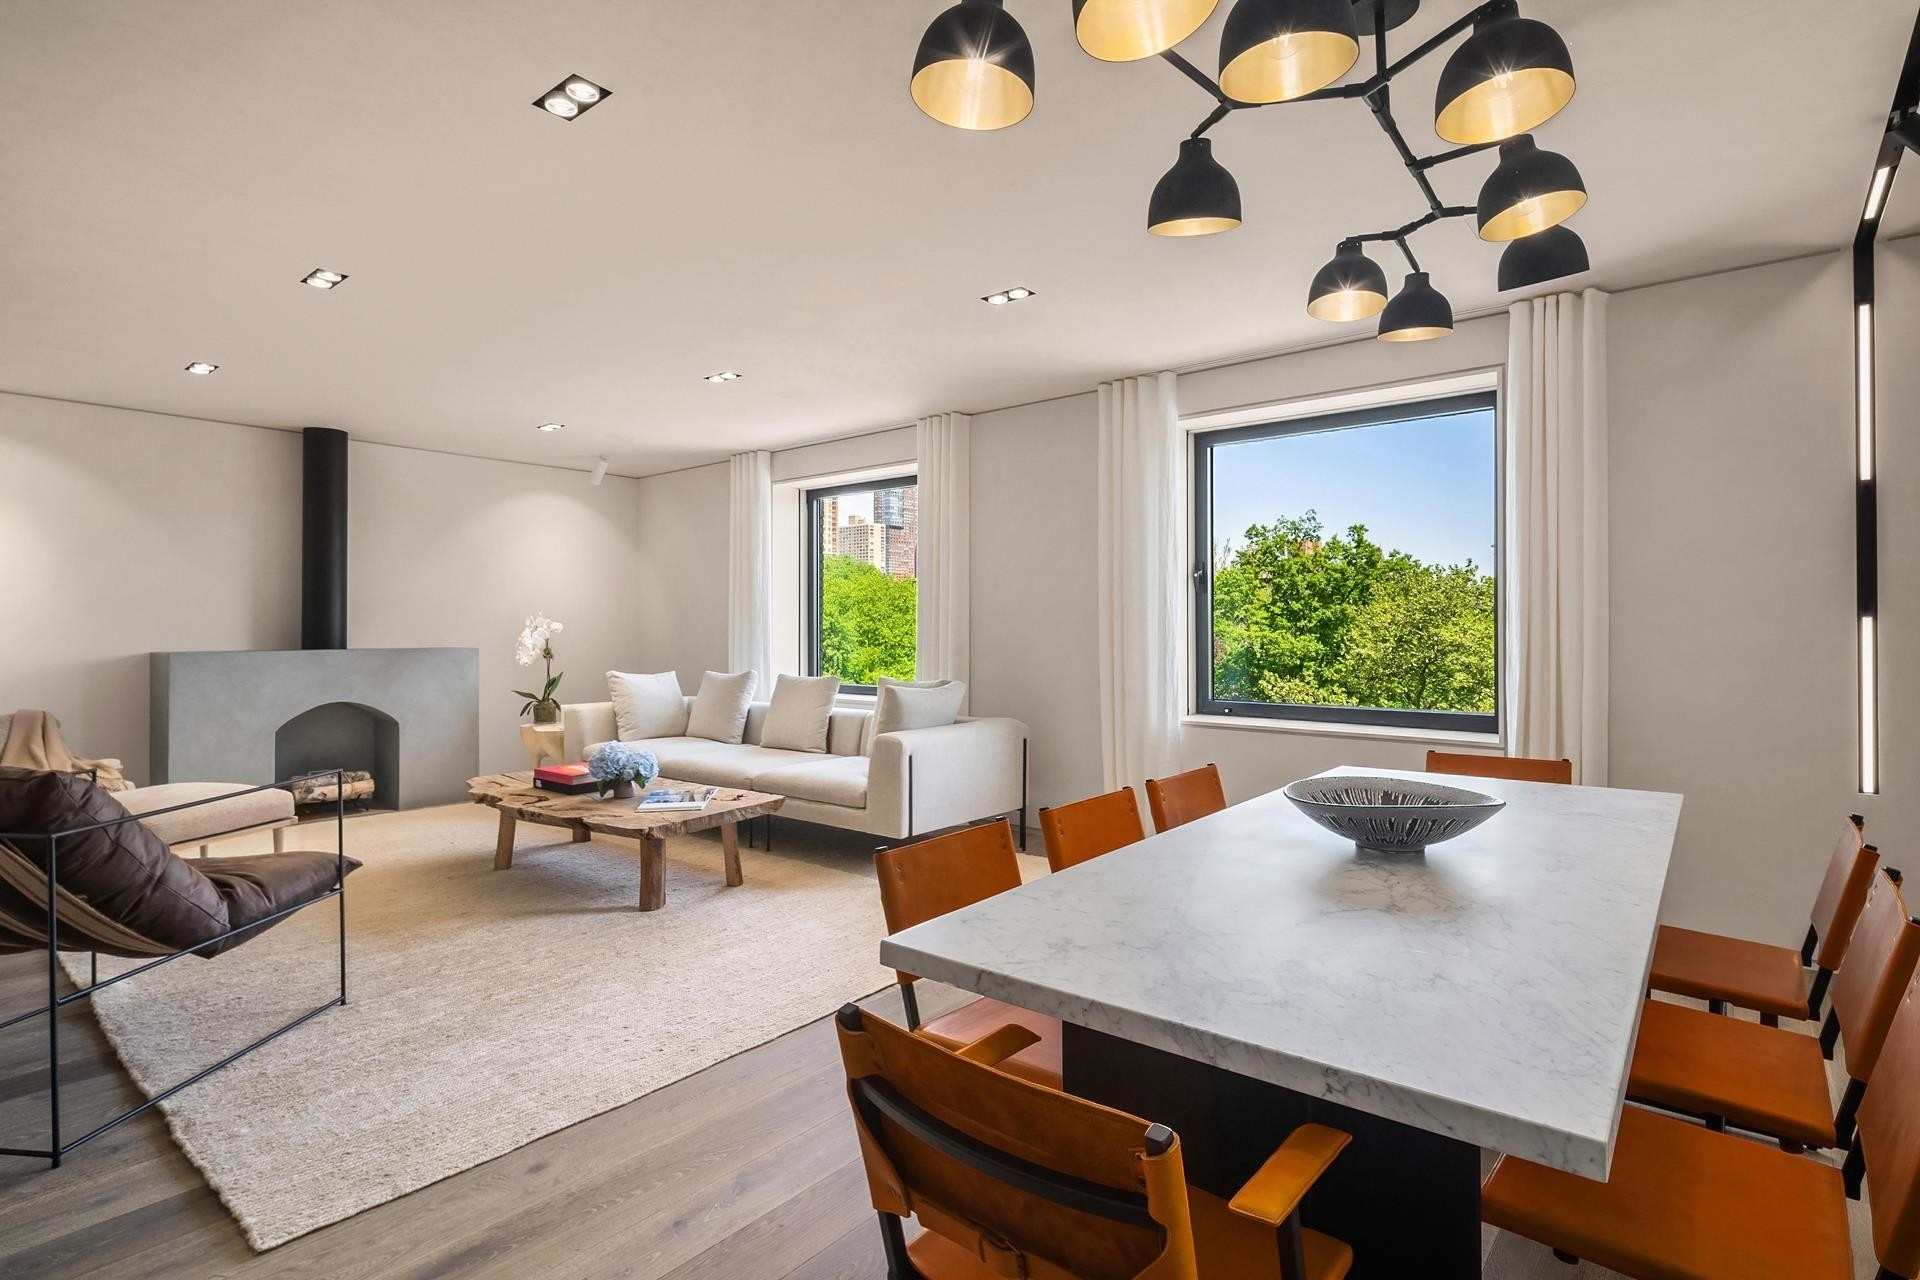 Condominium for Sale at Essex House, 160 CENTRAL PARK S, 615 Central Park South, New York, NY 10019